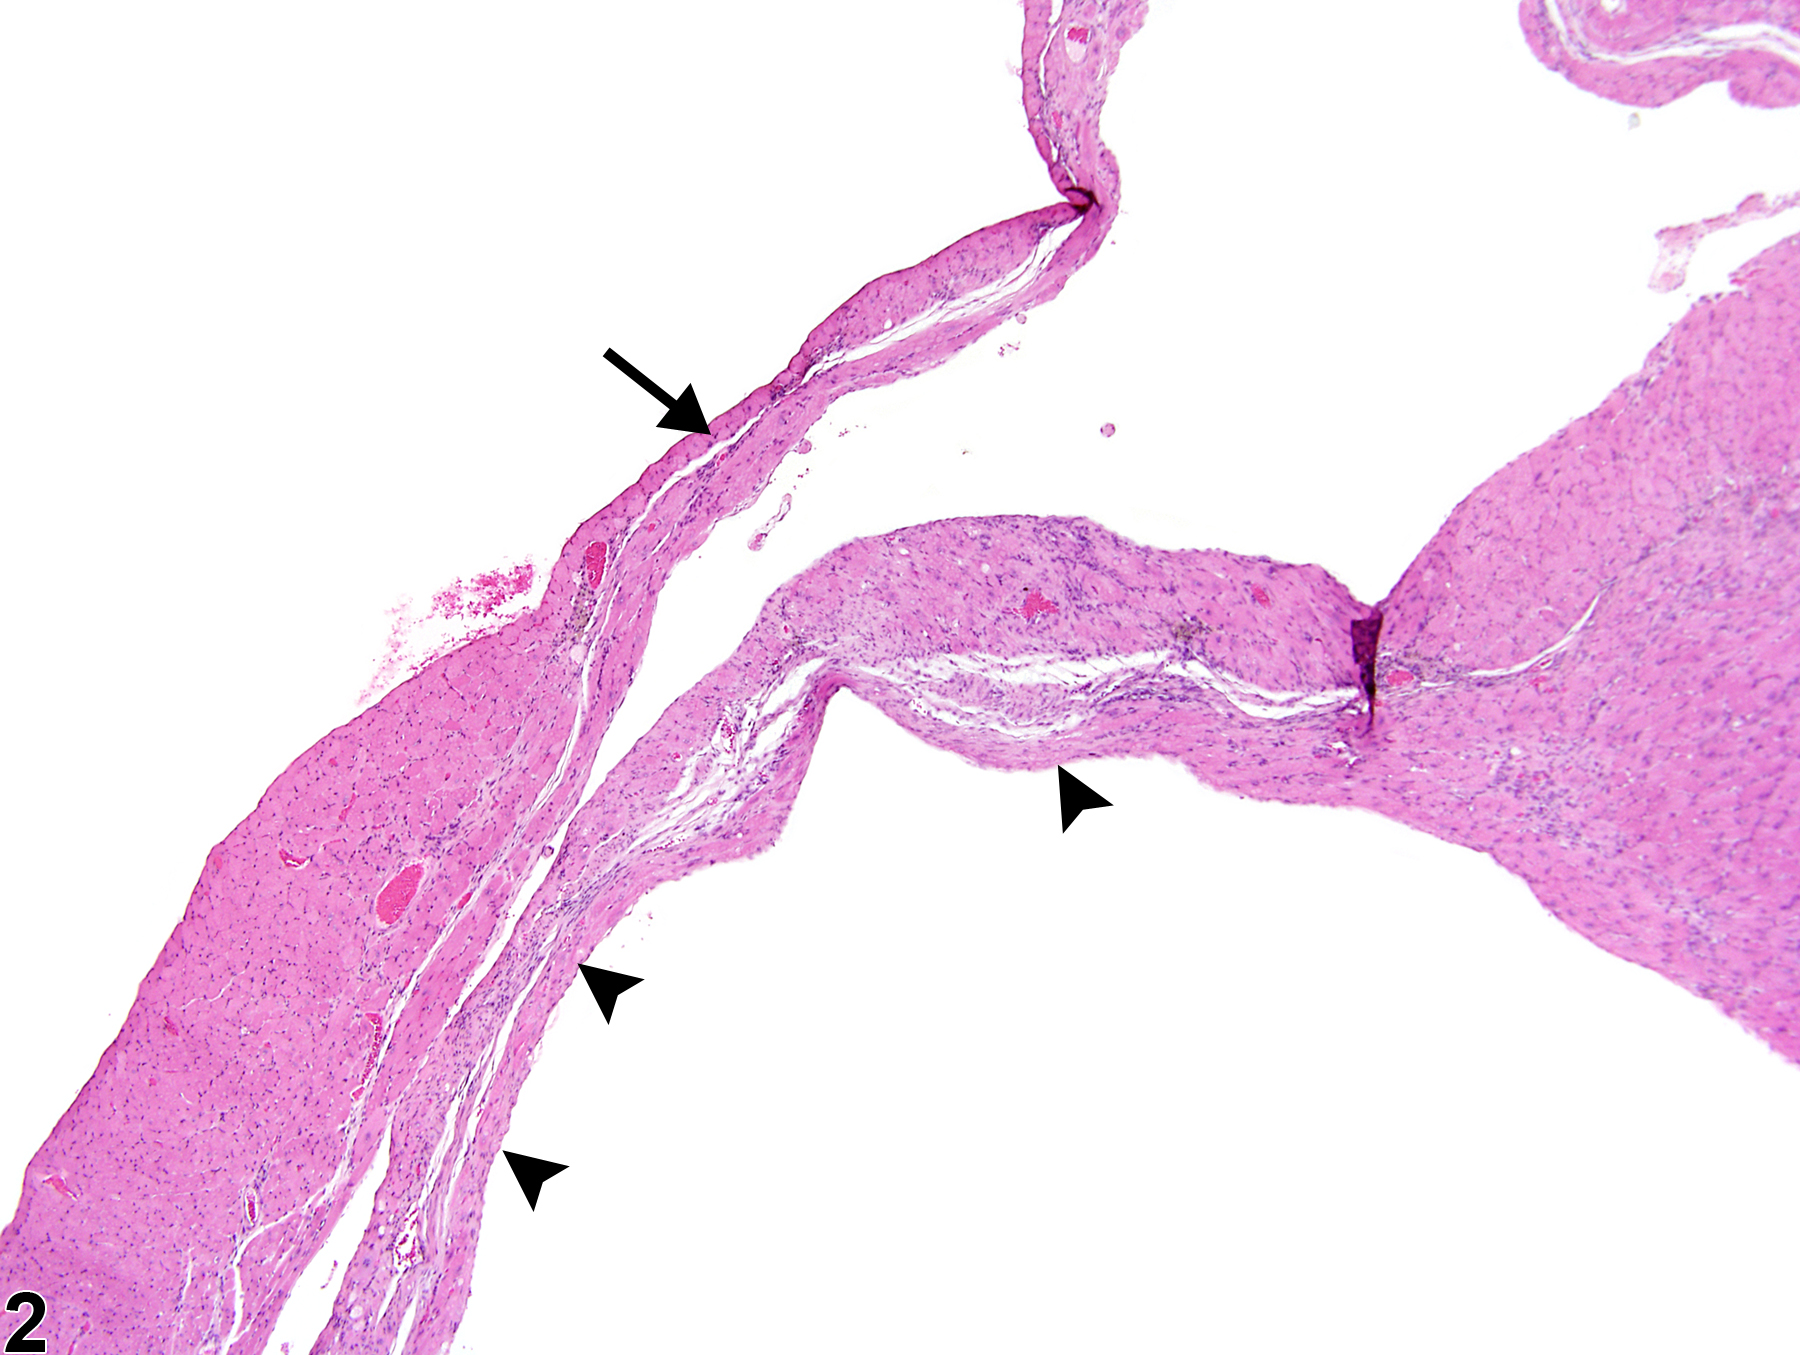 Image of atrophy in the heart from a male B6C3F1/N mouse in a chronic study